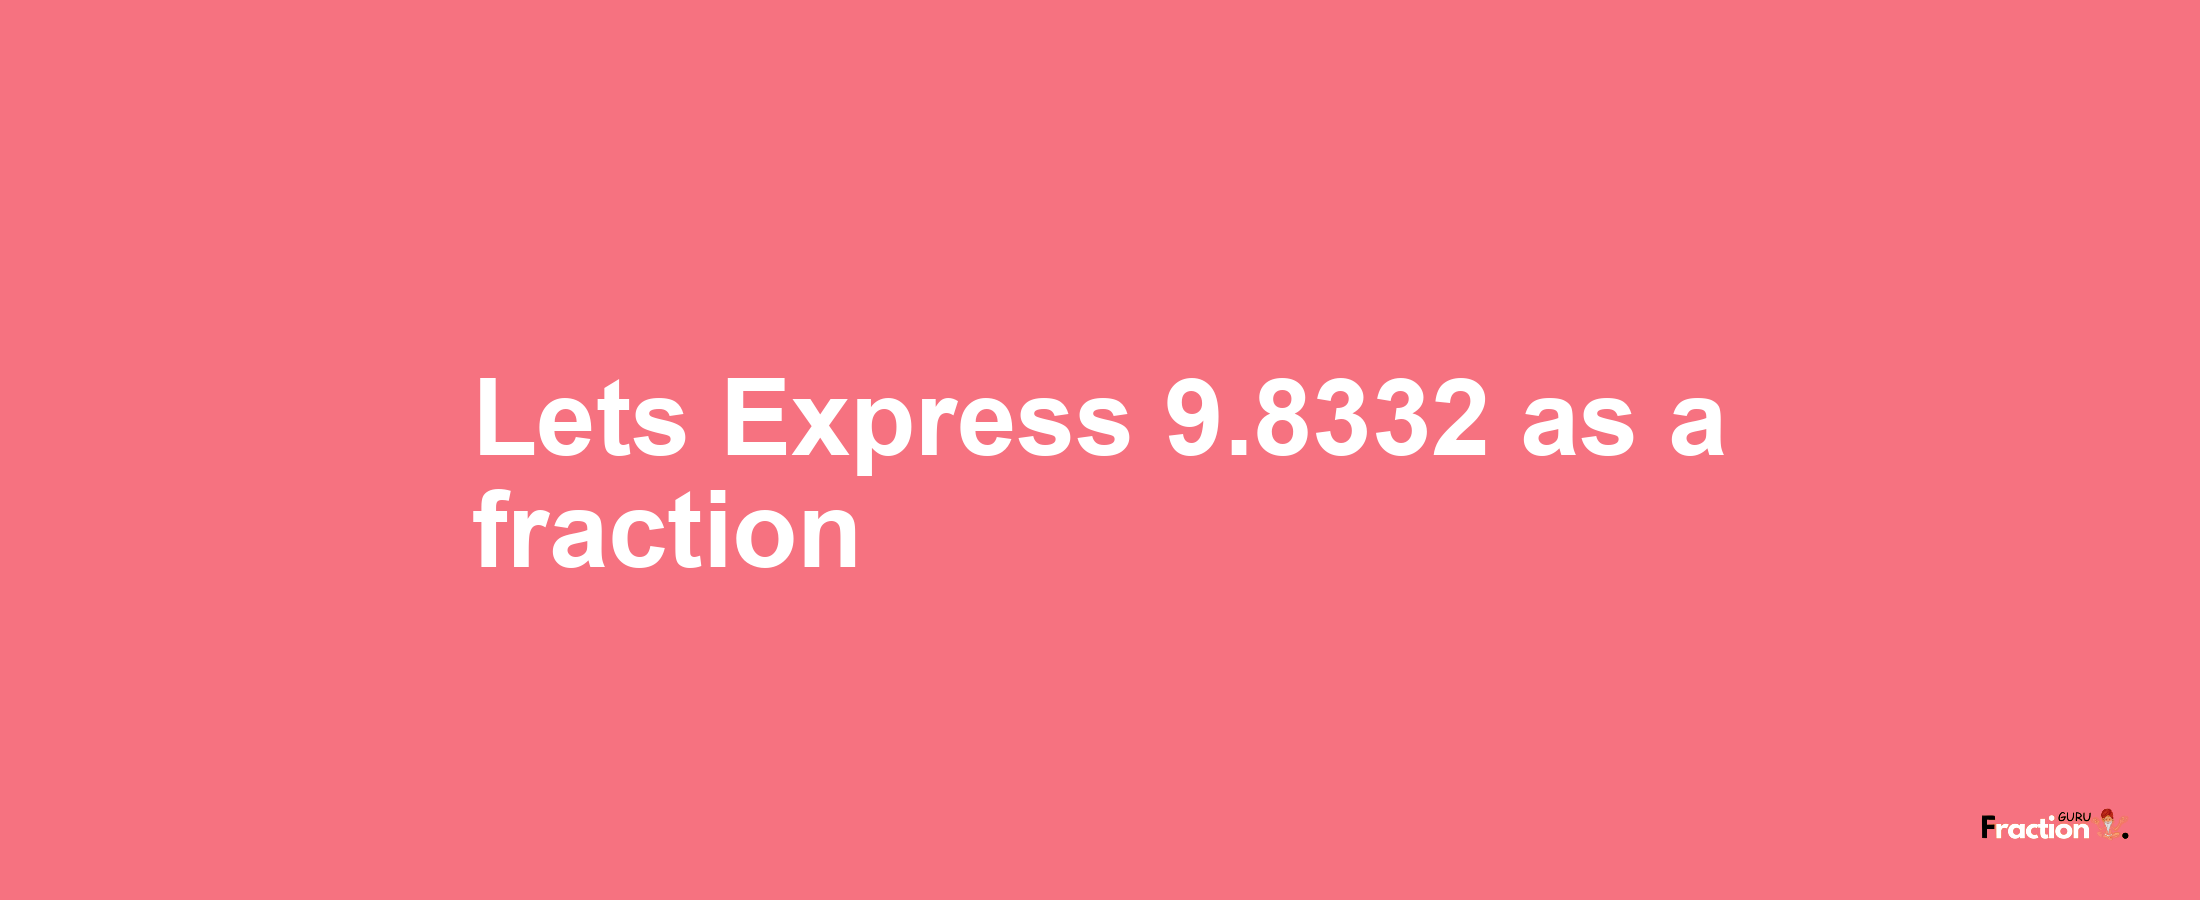 Lets Express 9.8332 as afraction